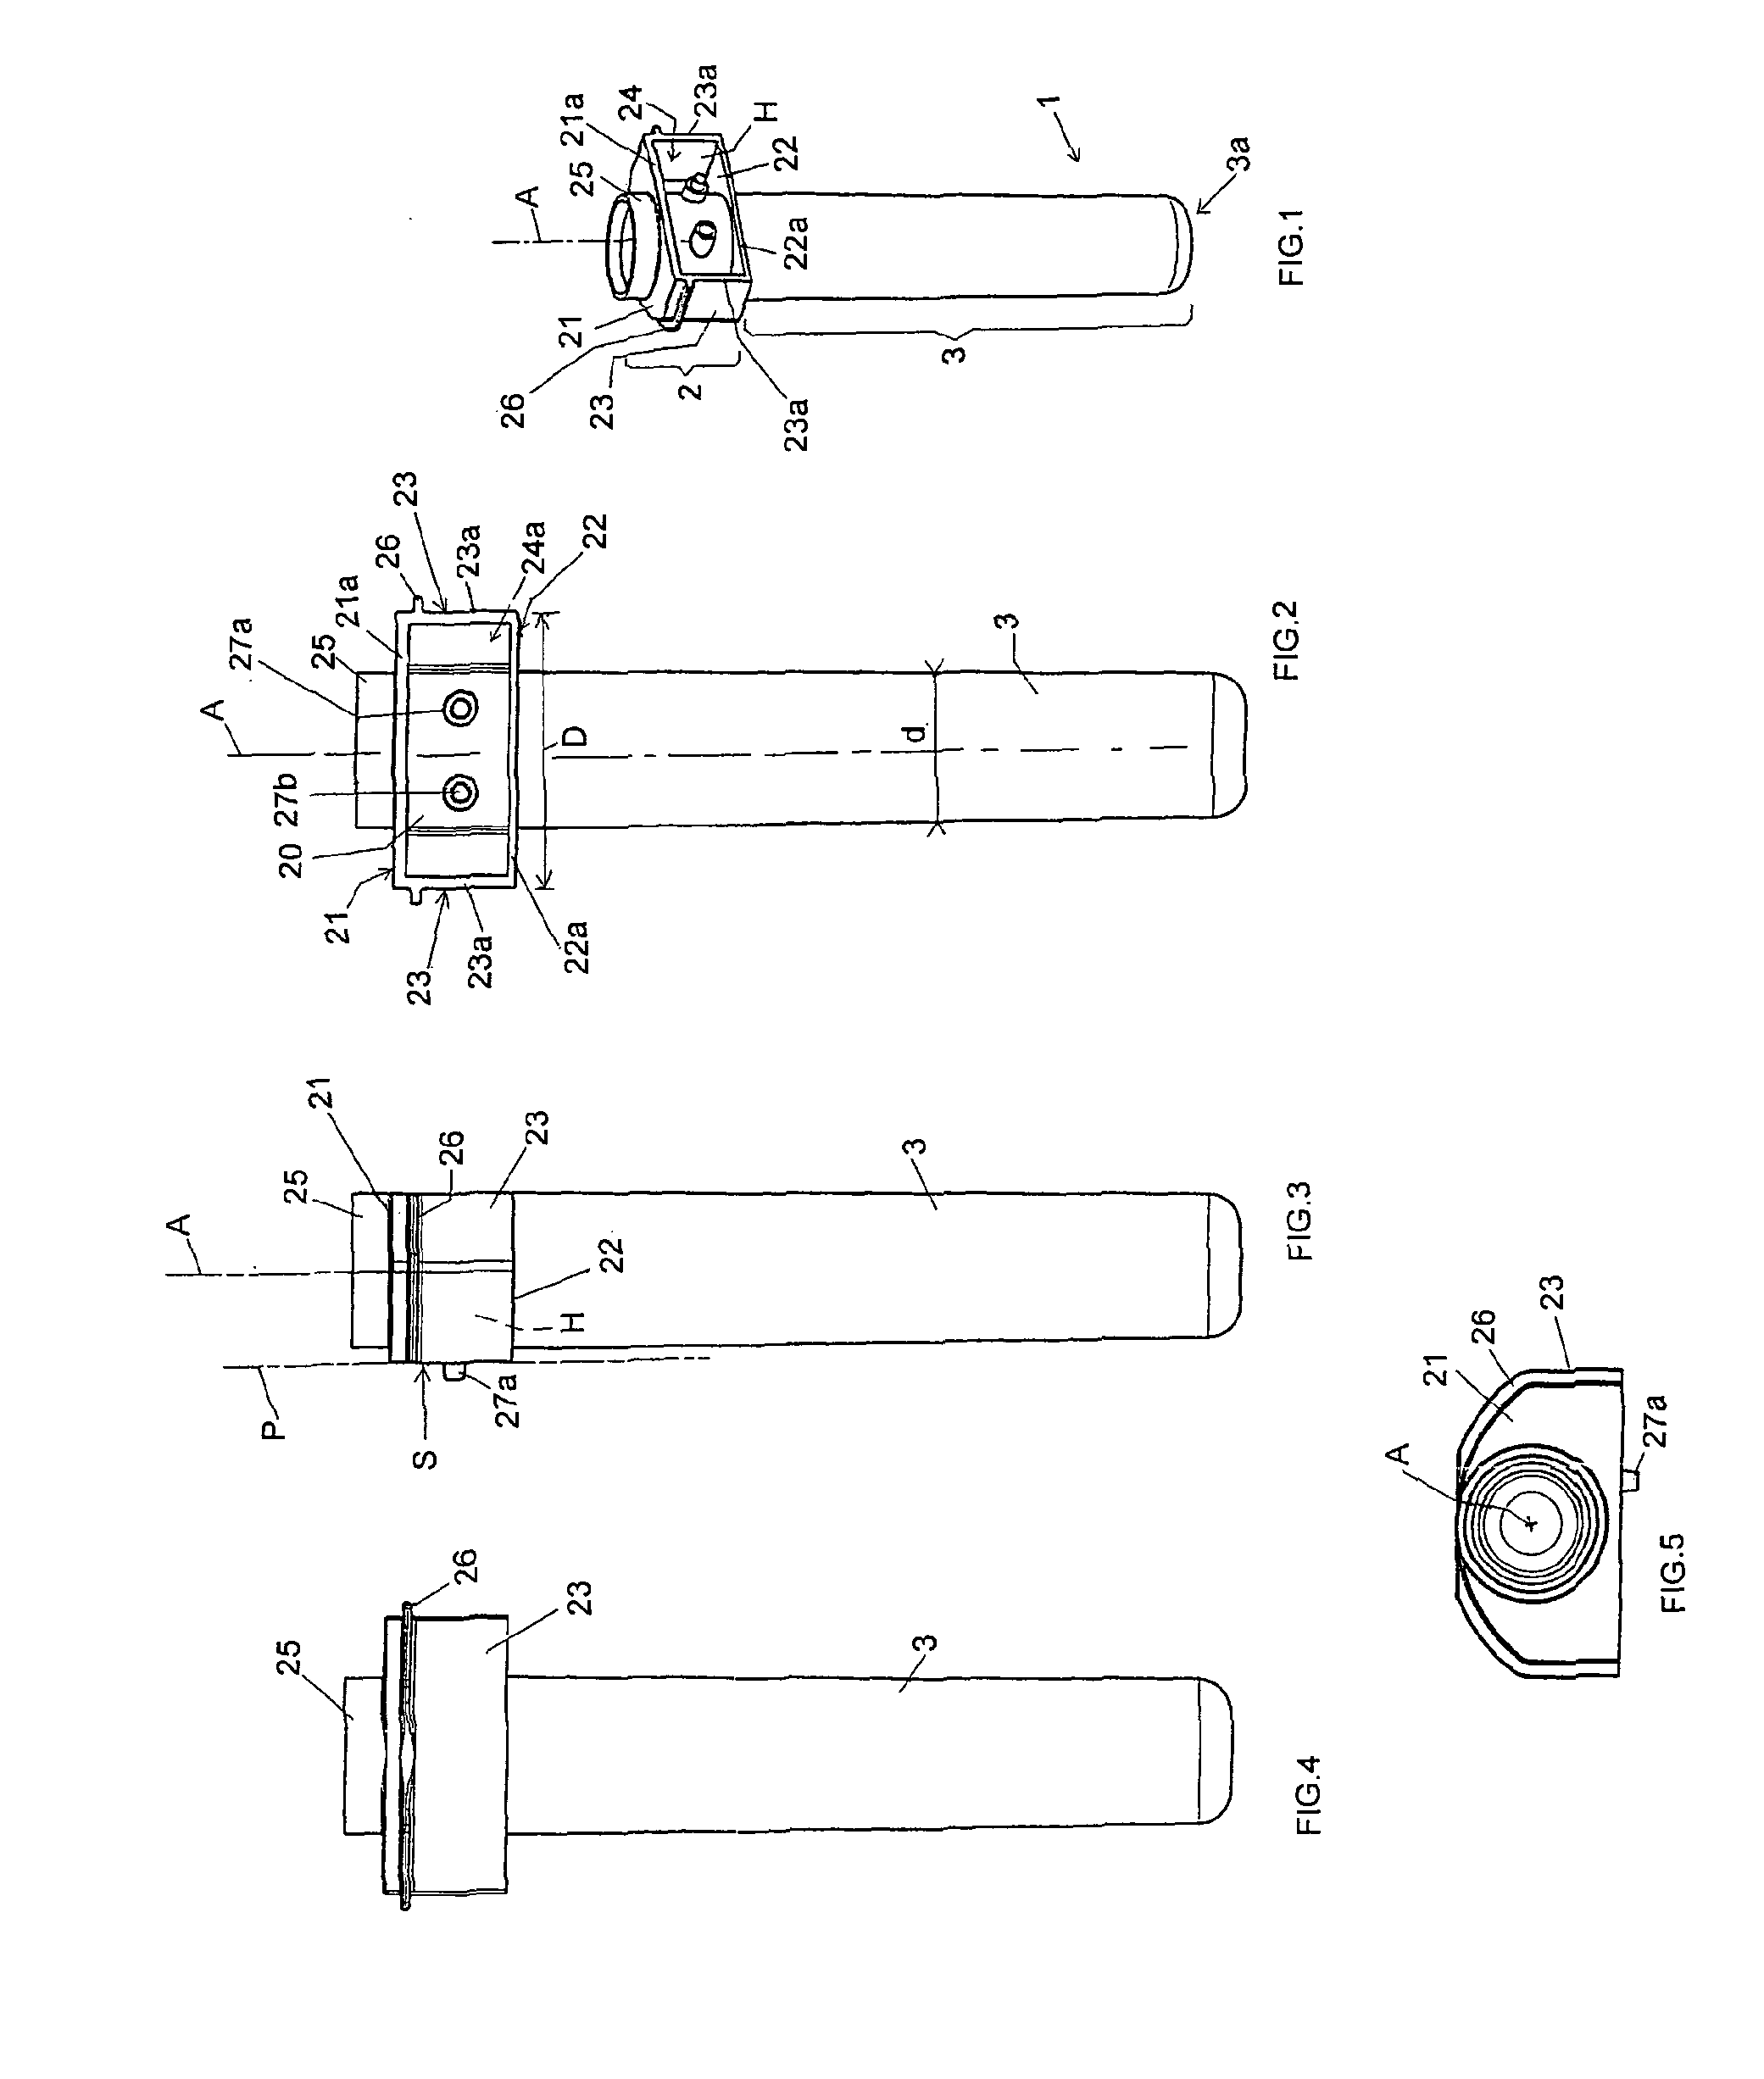 Plastic preform and single container for making a dual-container dispenser